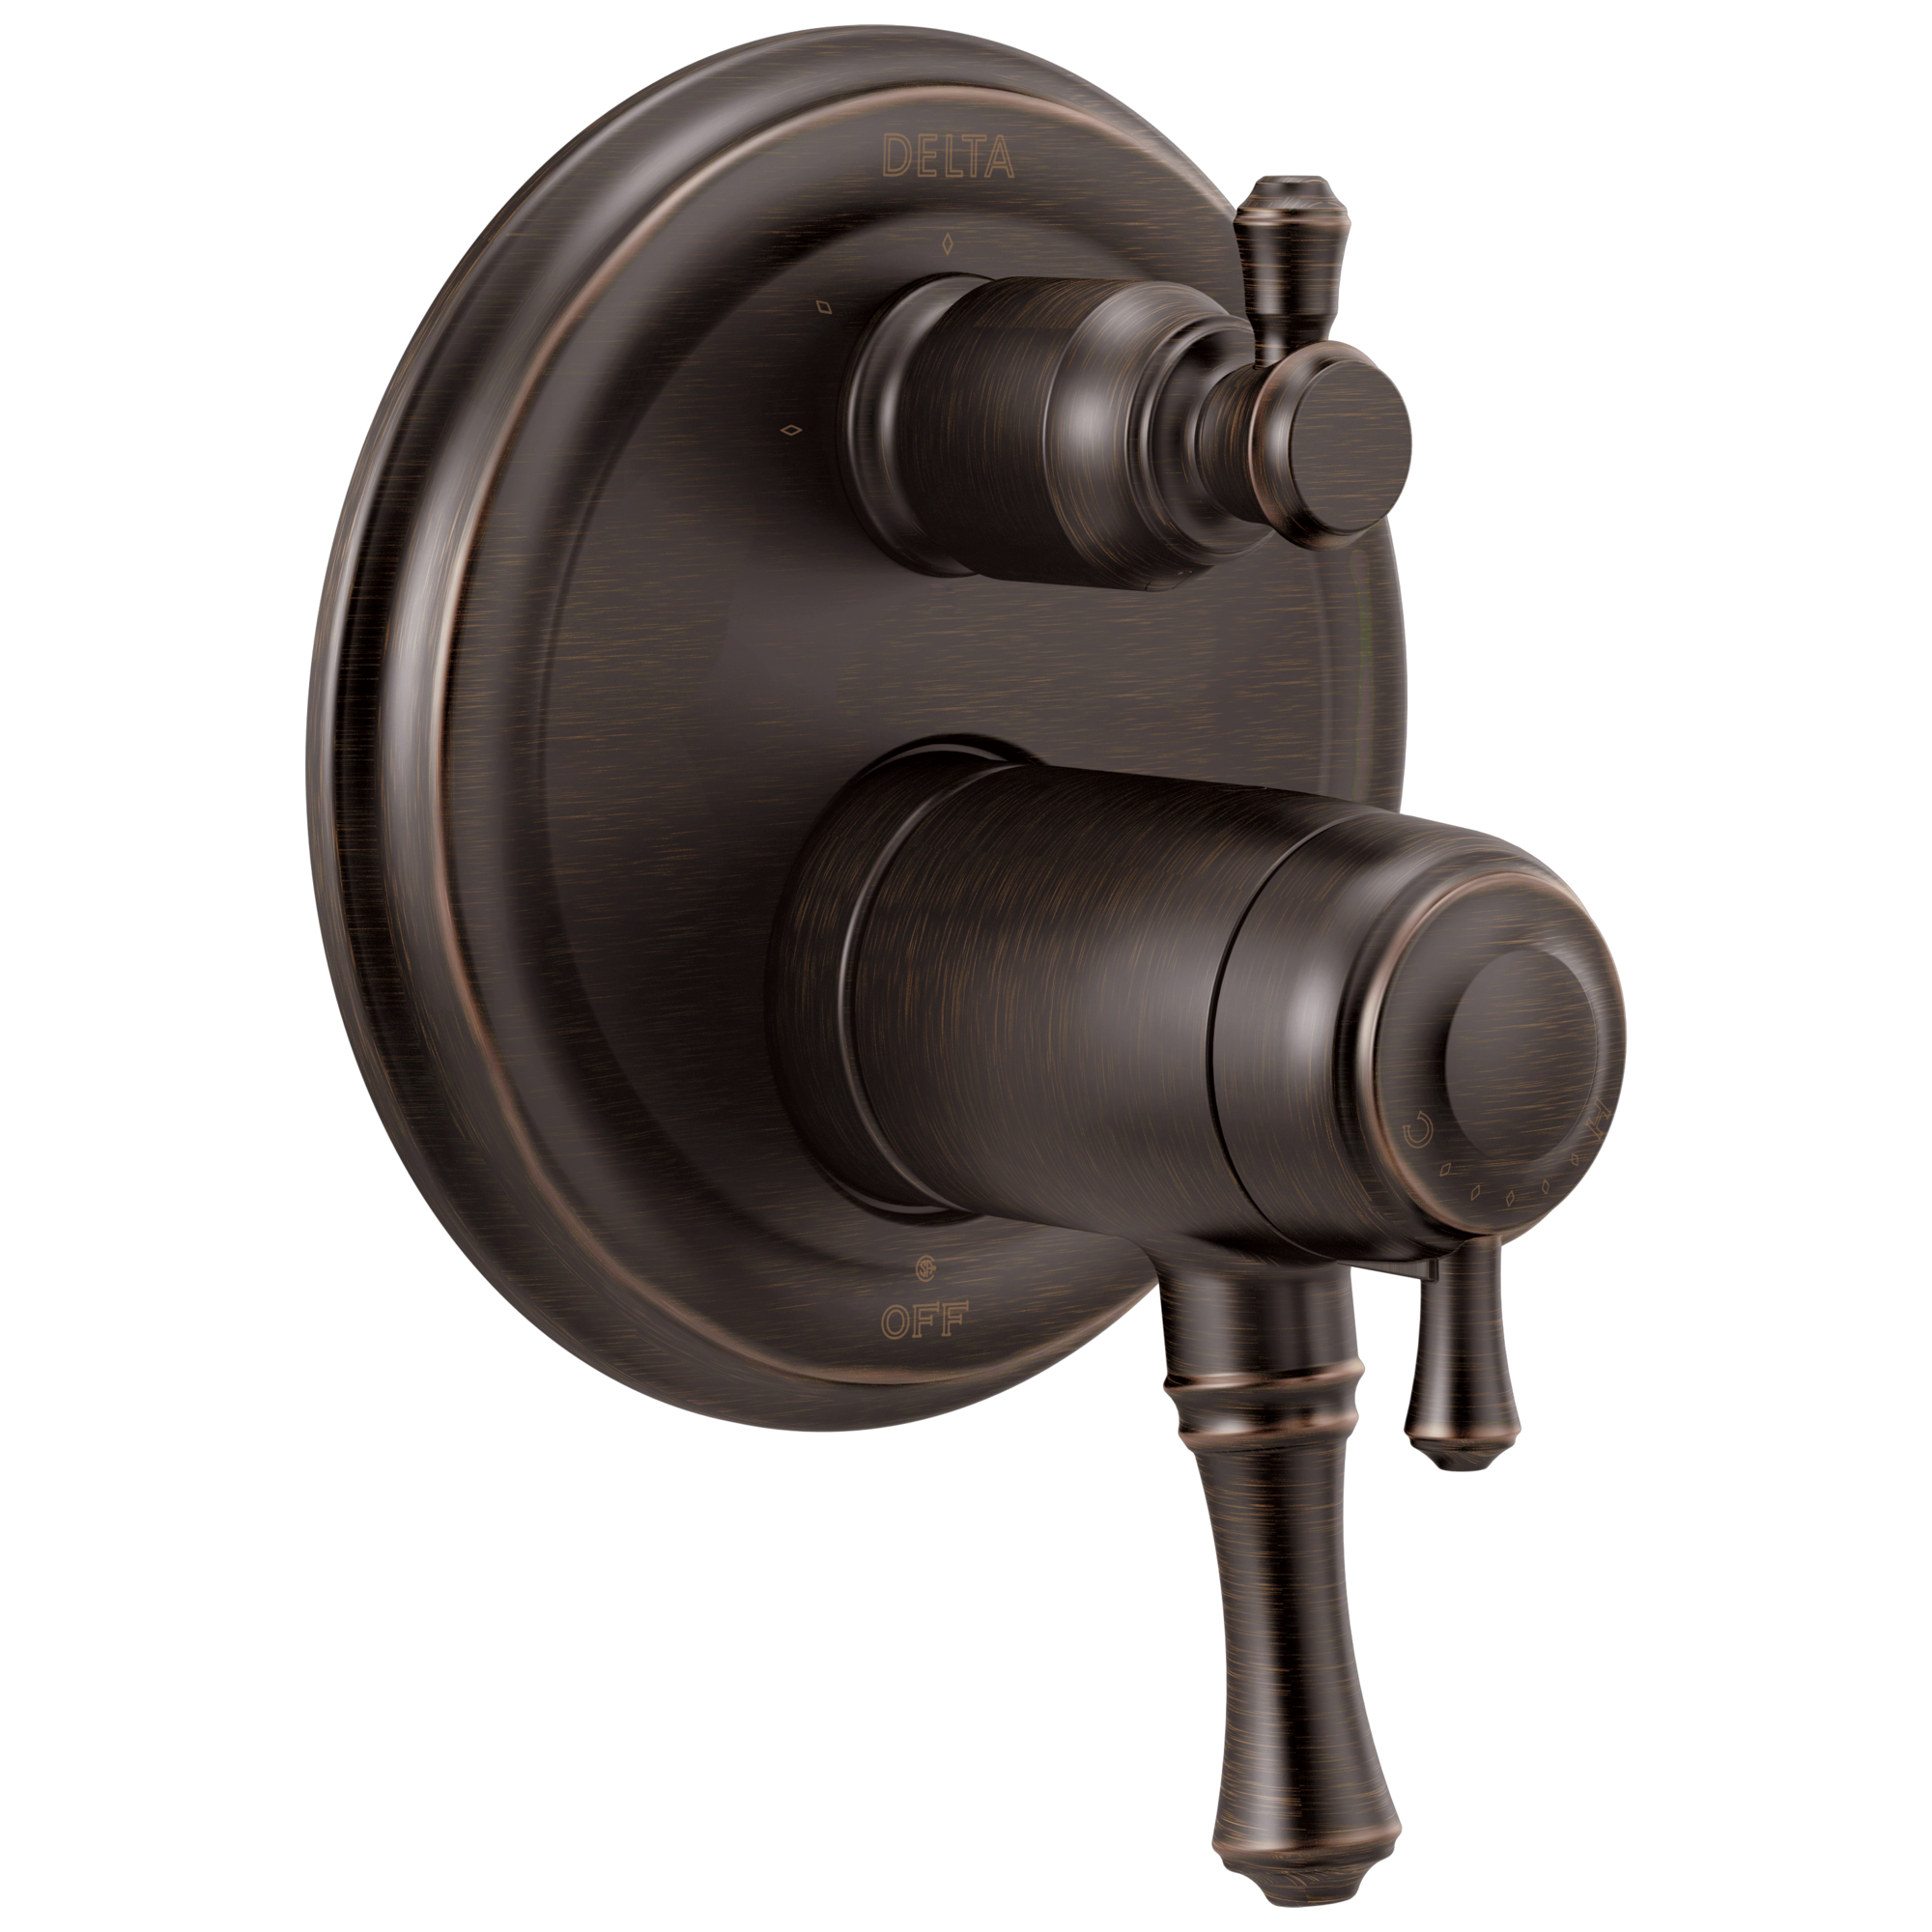 Delta T27T897 Cassidy Traditional 2-handle Tempassure 17T Series Valve Trim with 3-Setting Integrated Diverter